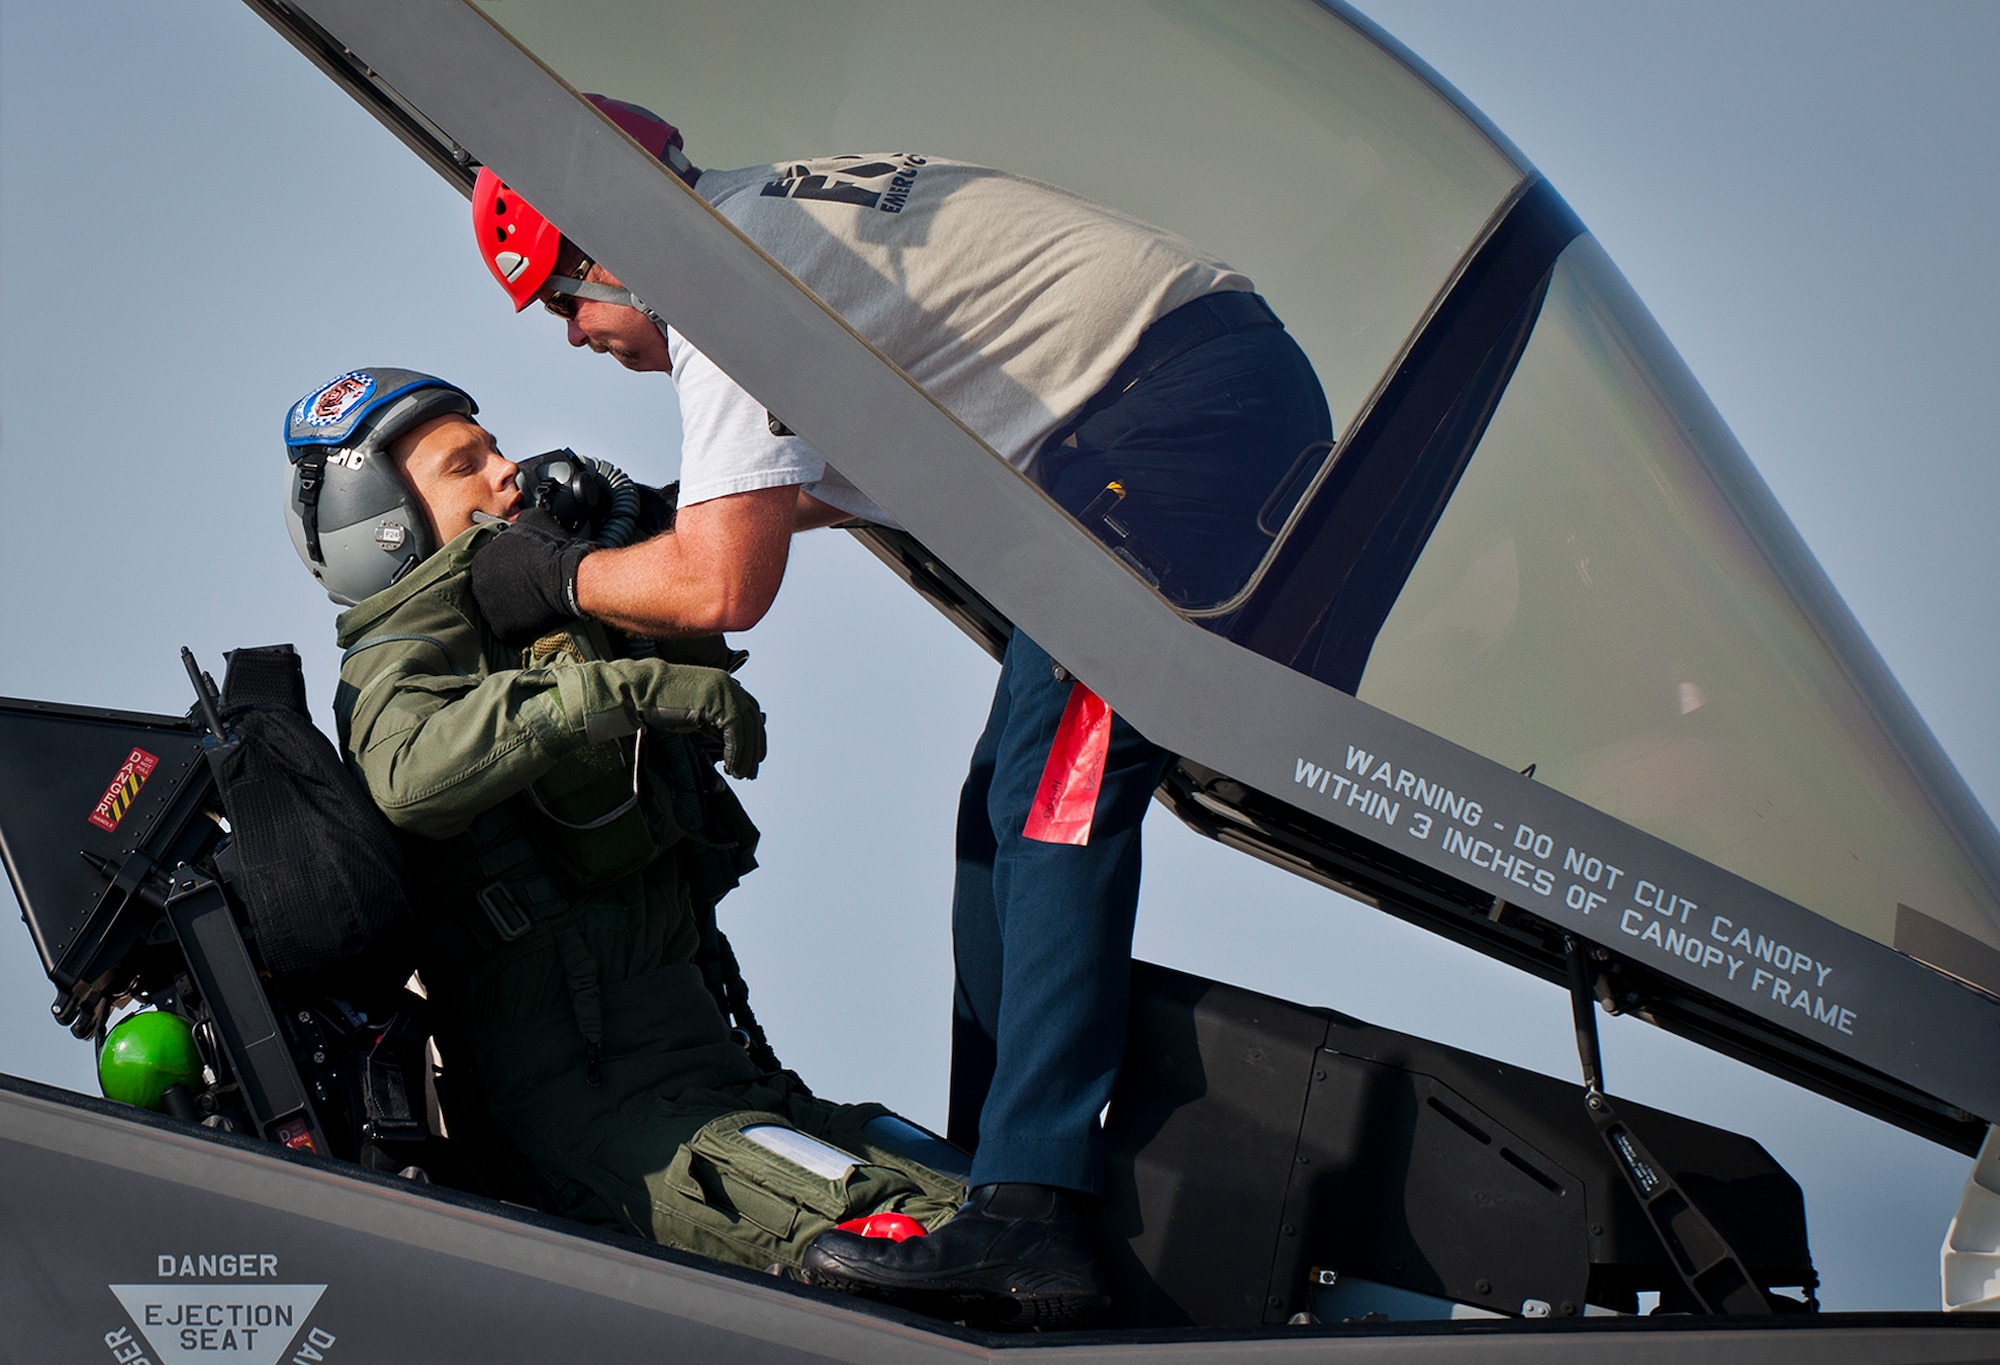 Brian Easterling, a 96th Test Wing firefighter, extracts an injured pilot from an F-35 Lightning II during a major accident response exercise May 9.  This was the first MARE involving the Air Force’s newest fighter aircraft at Eglin.  First responders had to put out fires on debris from the aircraft after a hard landing.  They also had to extract the injured pilot and get him to medical personnel.  (U.S. Air Force photo/Samuel King Jr.)